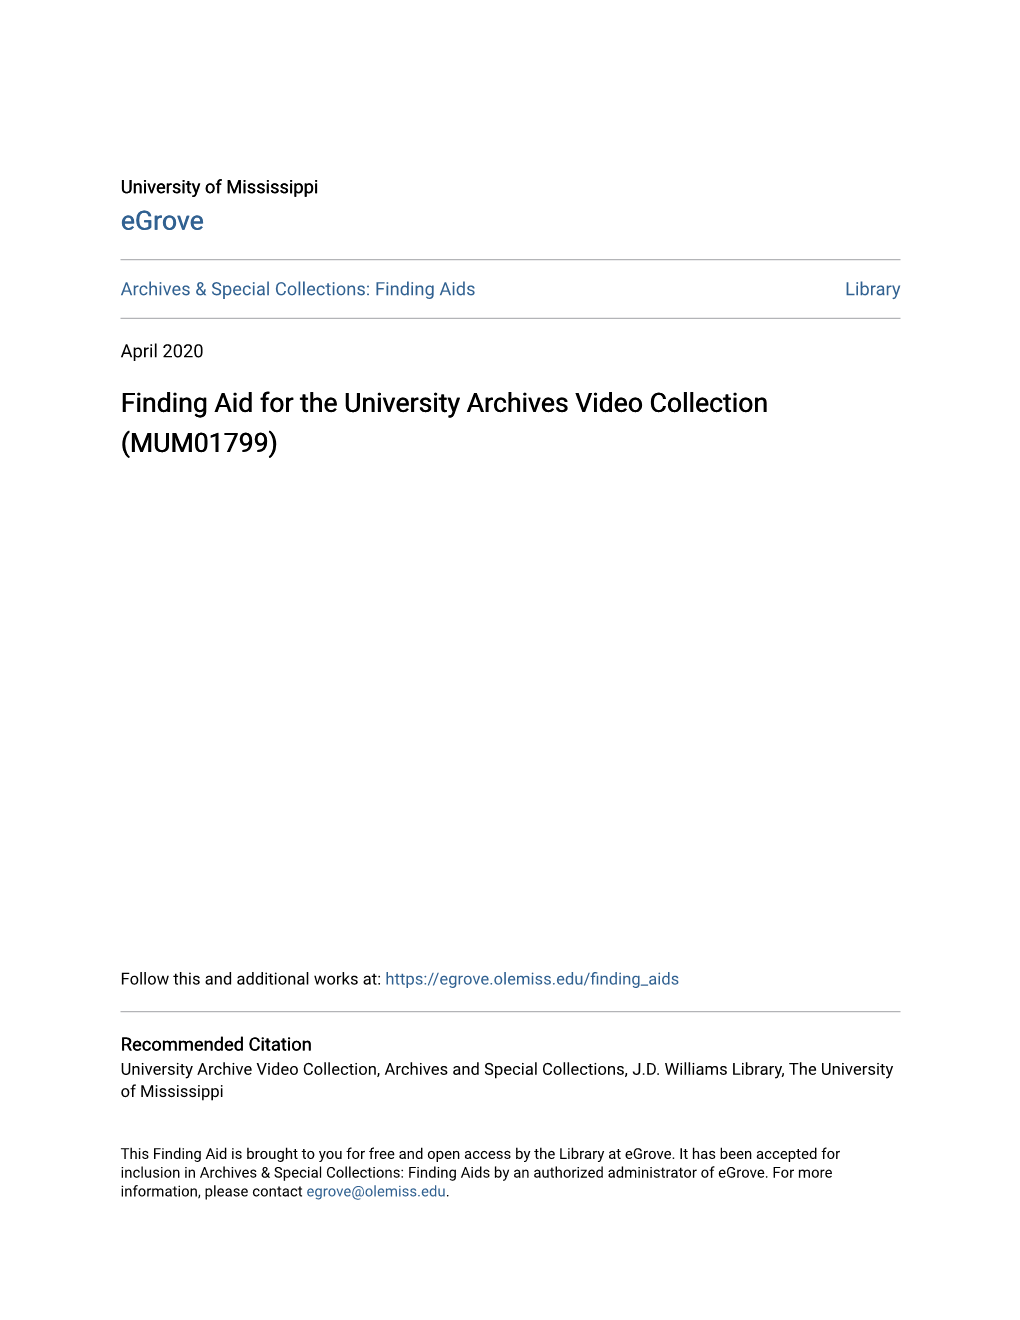 Finding Aid for the University Archives Video Collection (MUM01799)